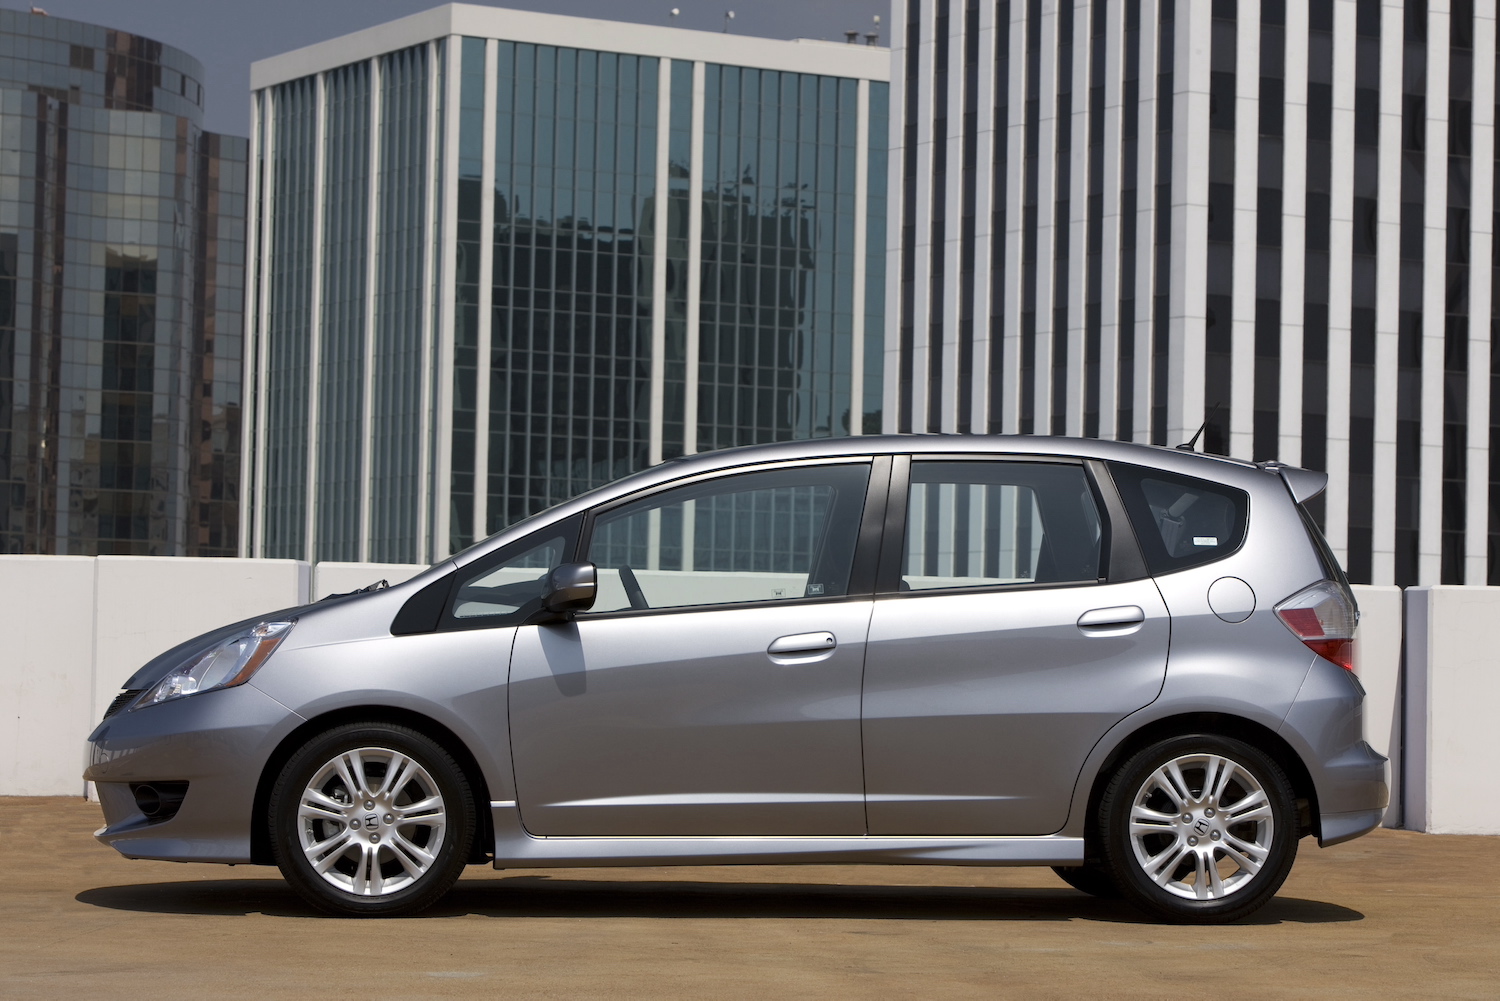 A silver 2009 Honda Fit parked, the Fit is one of the best cheap used cars under $5,000